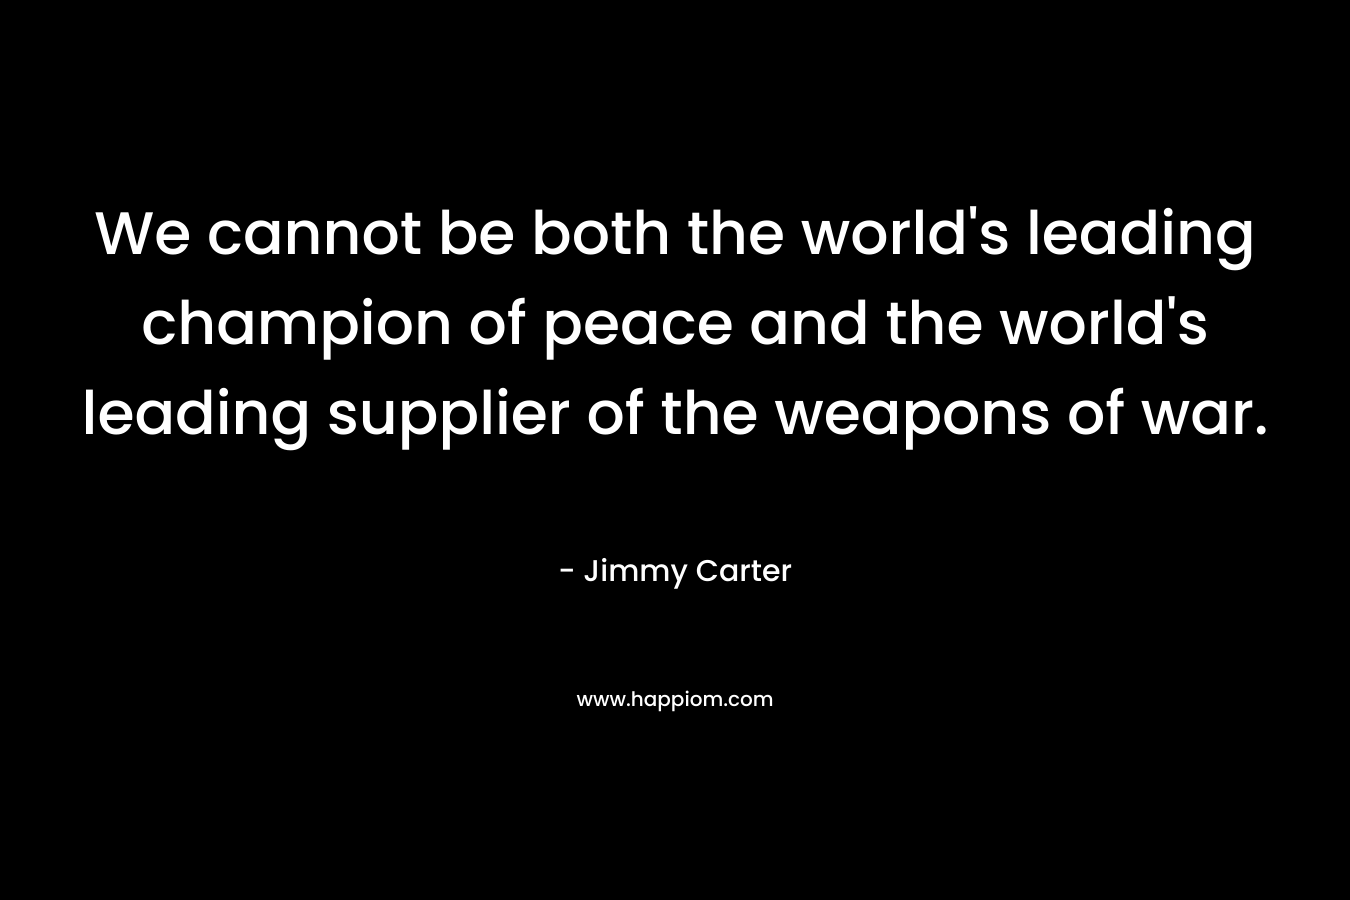 We cannot be both the world’s leading champion of peace and the world’s leading supplier of the weapons of war. – Jimmy Carter